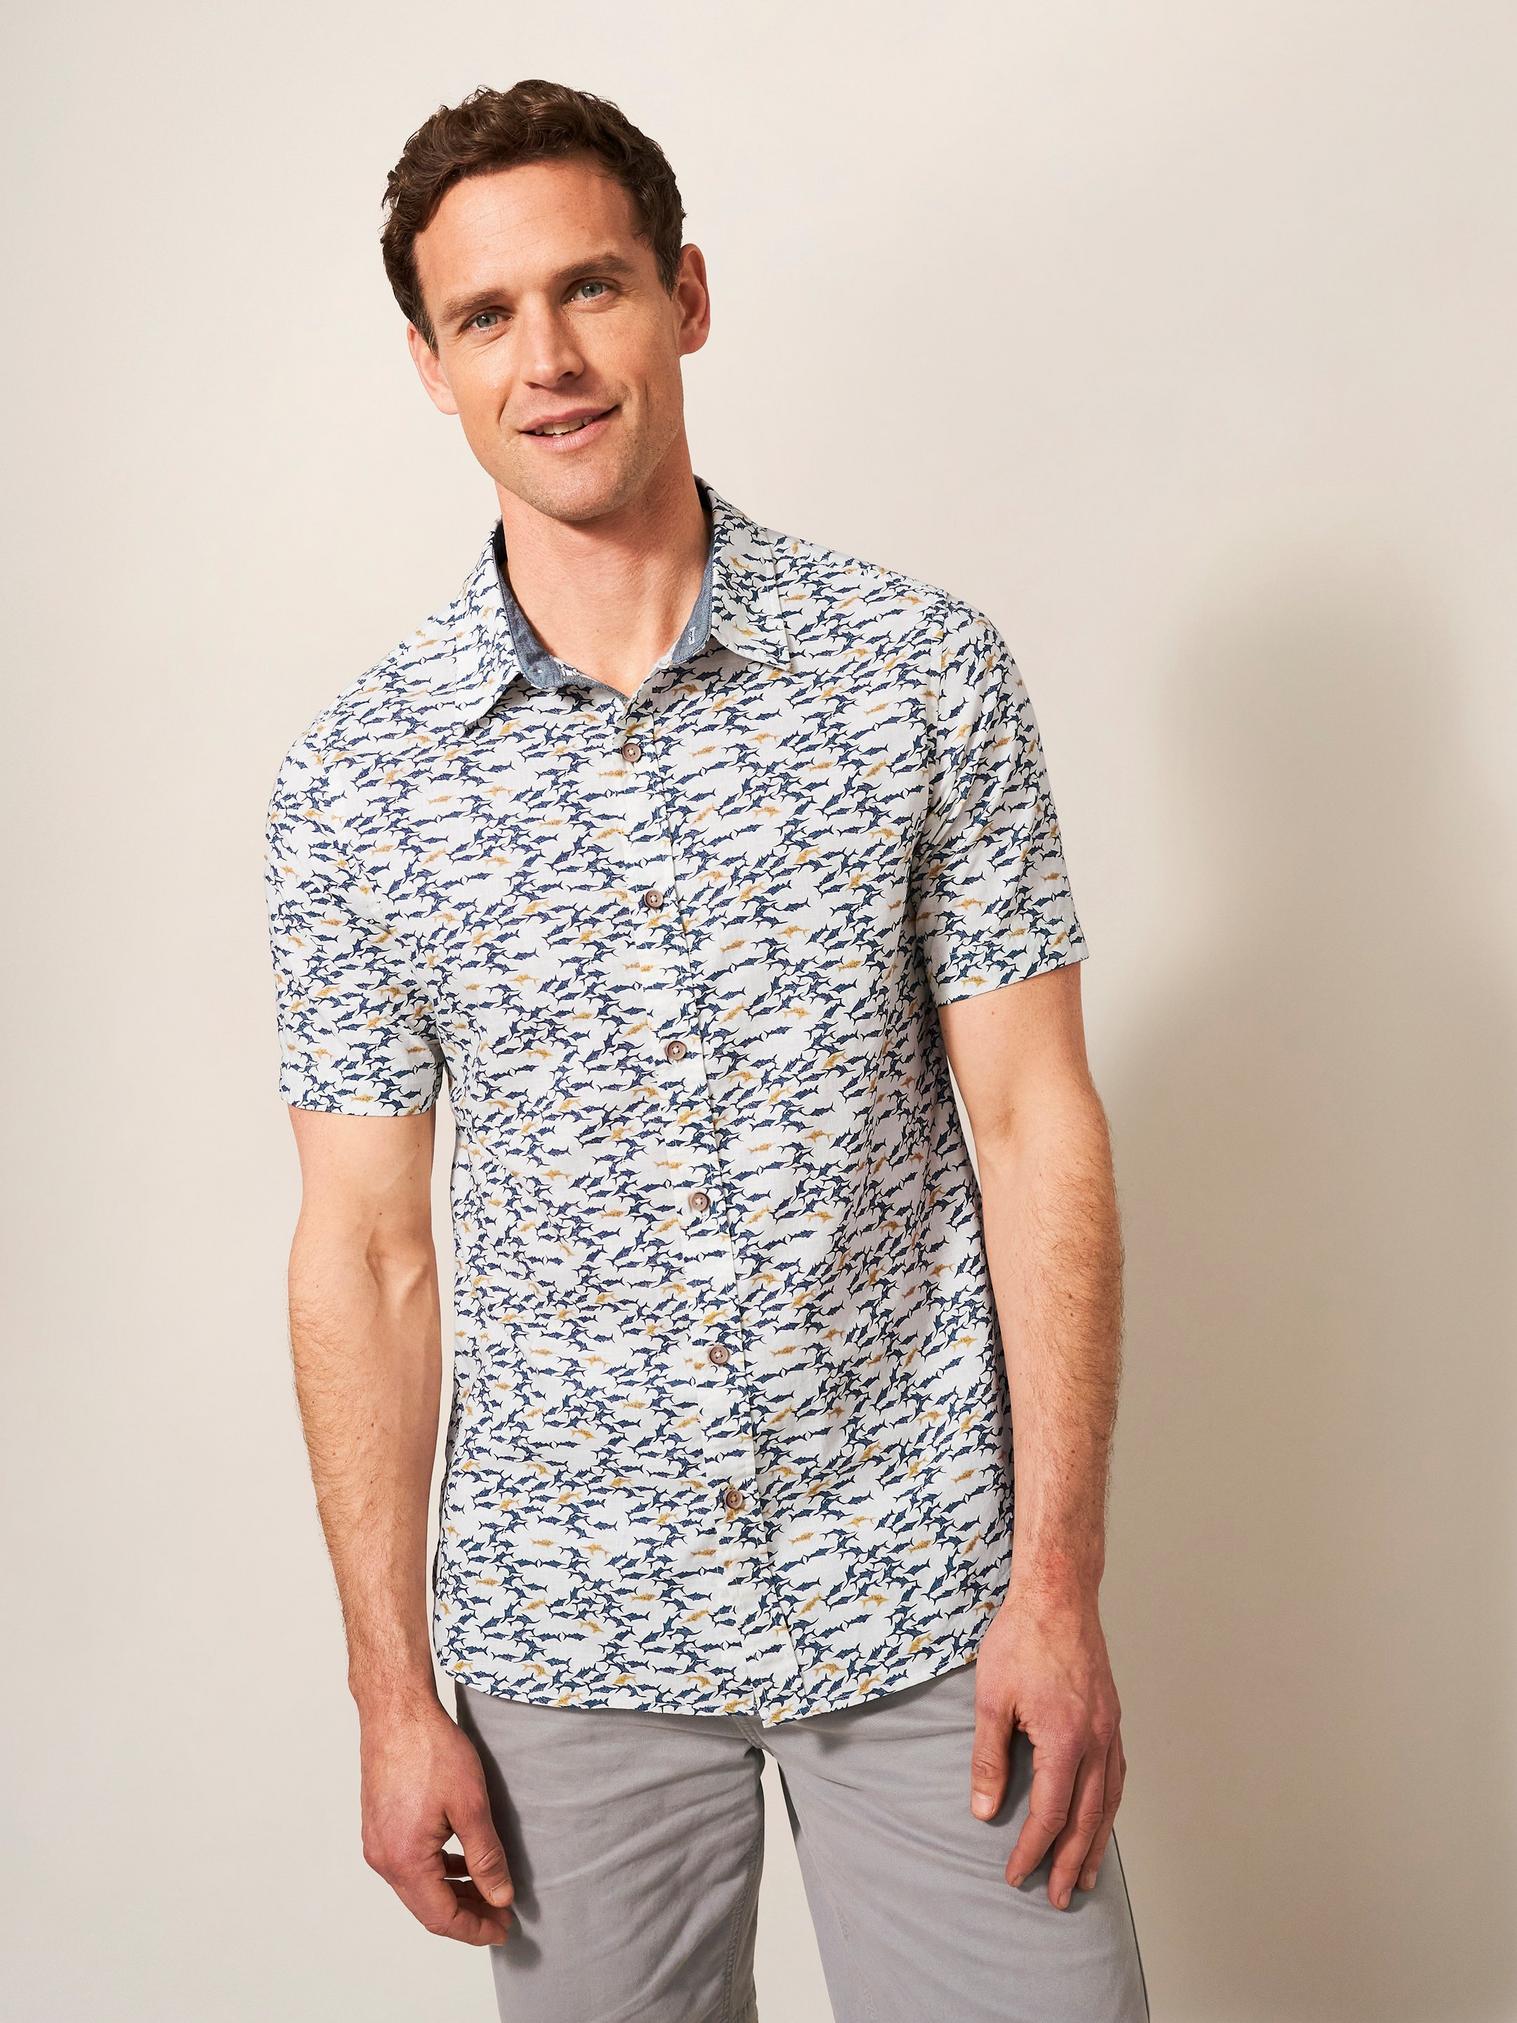 Shark Printed Shirt in WHITE MLT - LIFESTYLE